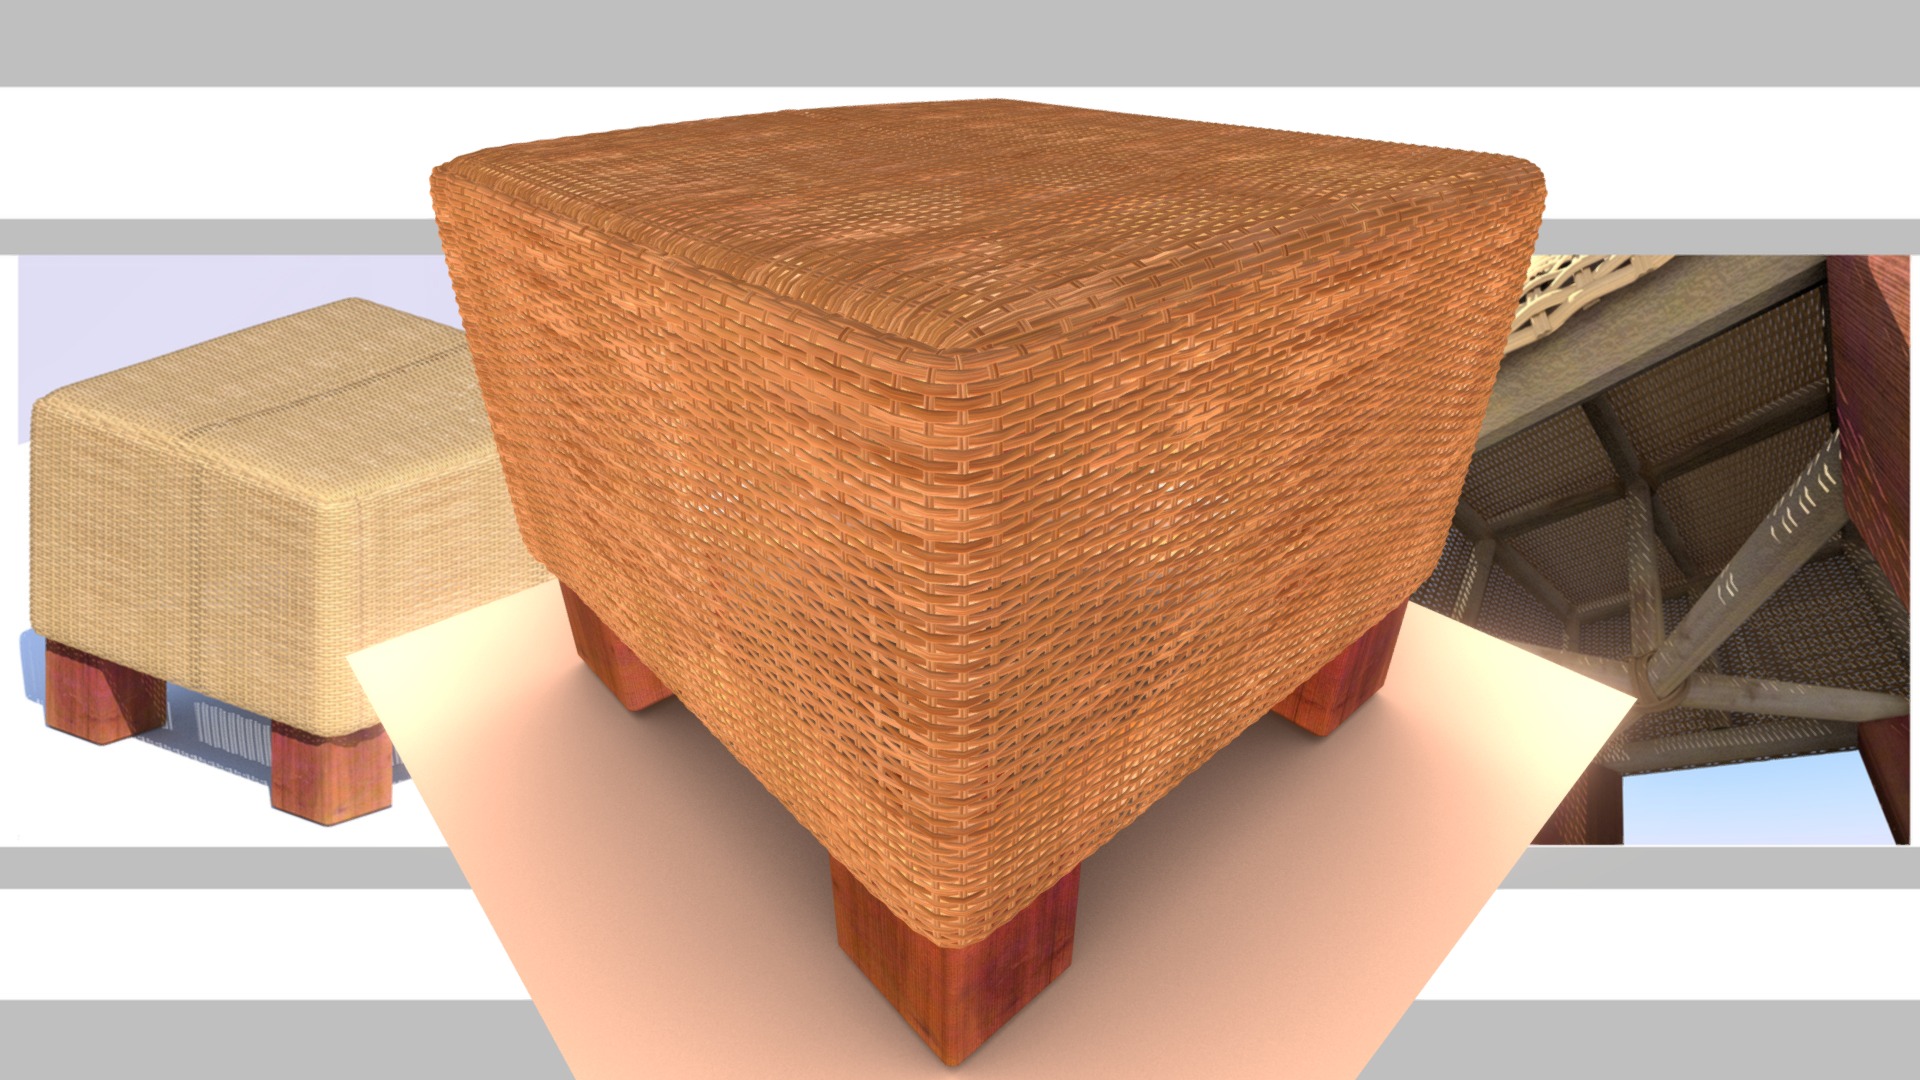 3D model Basket Stool - This is a 3D model of the Basket Stool. The 3D model is about a stack of wood.